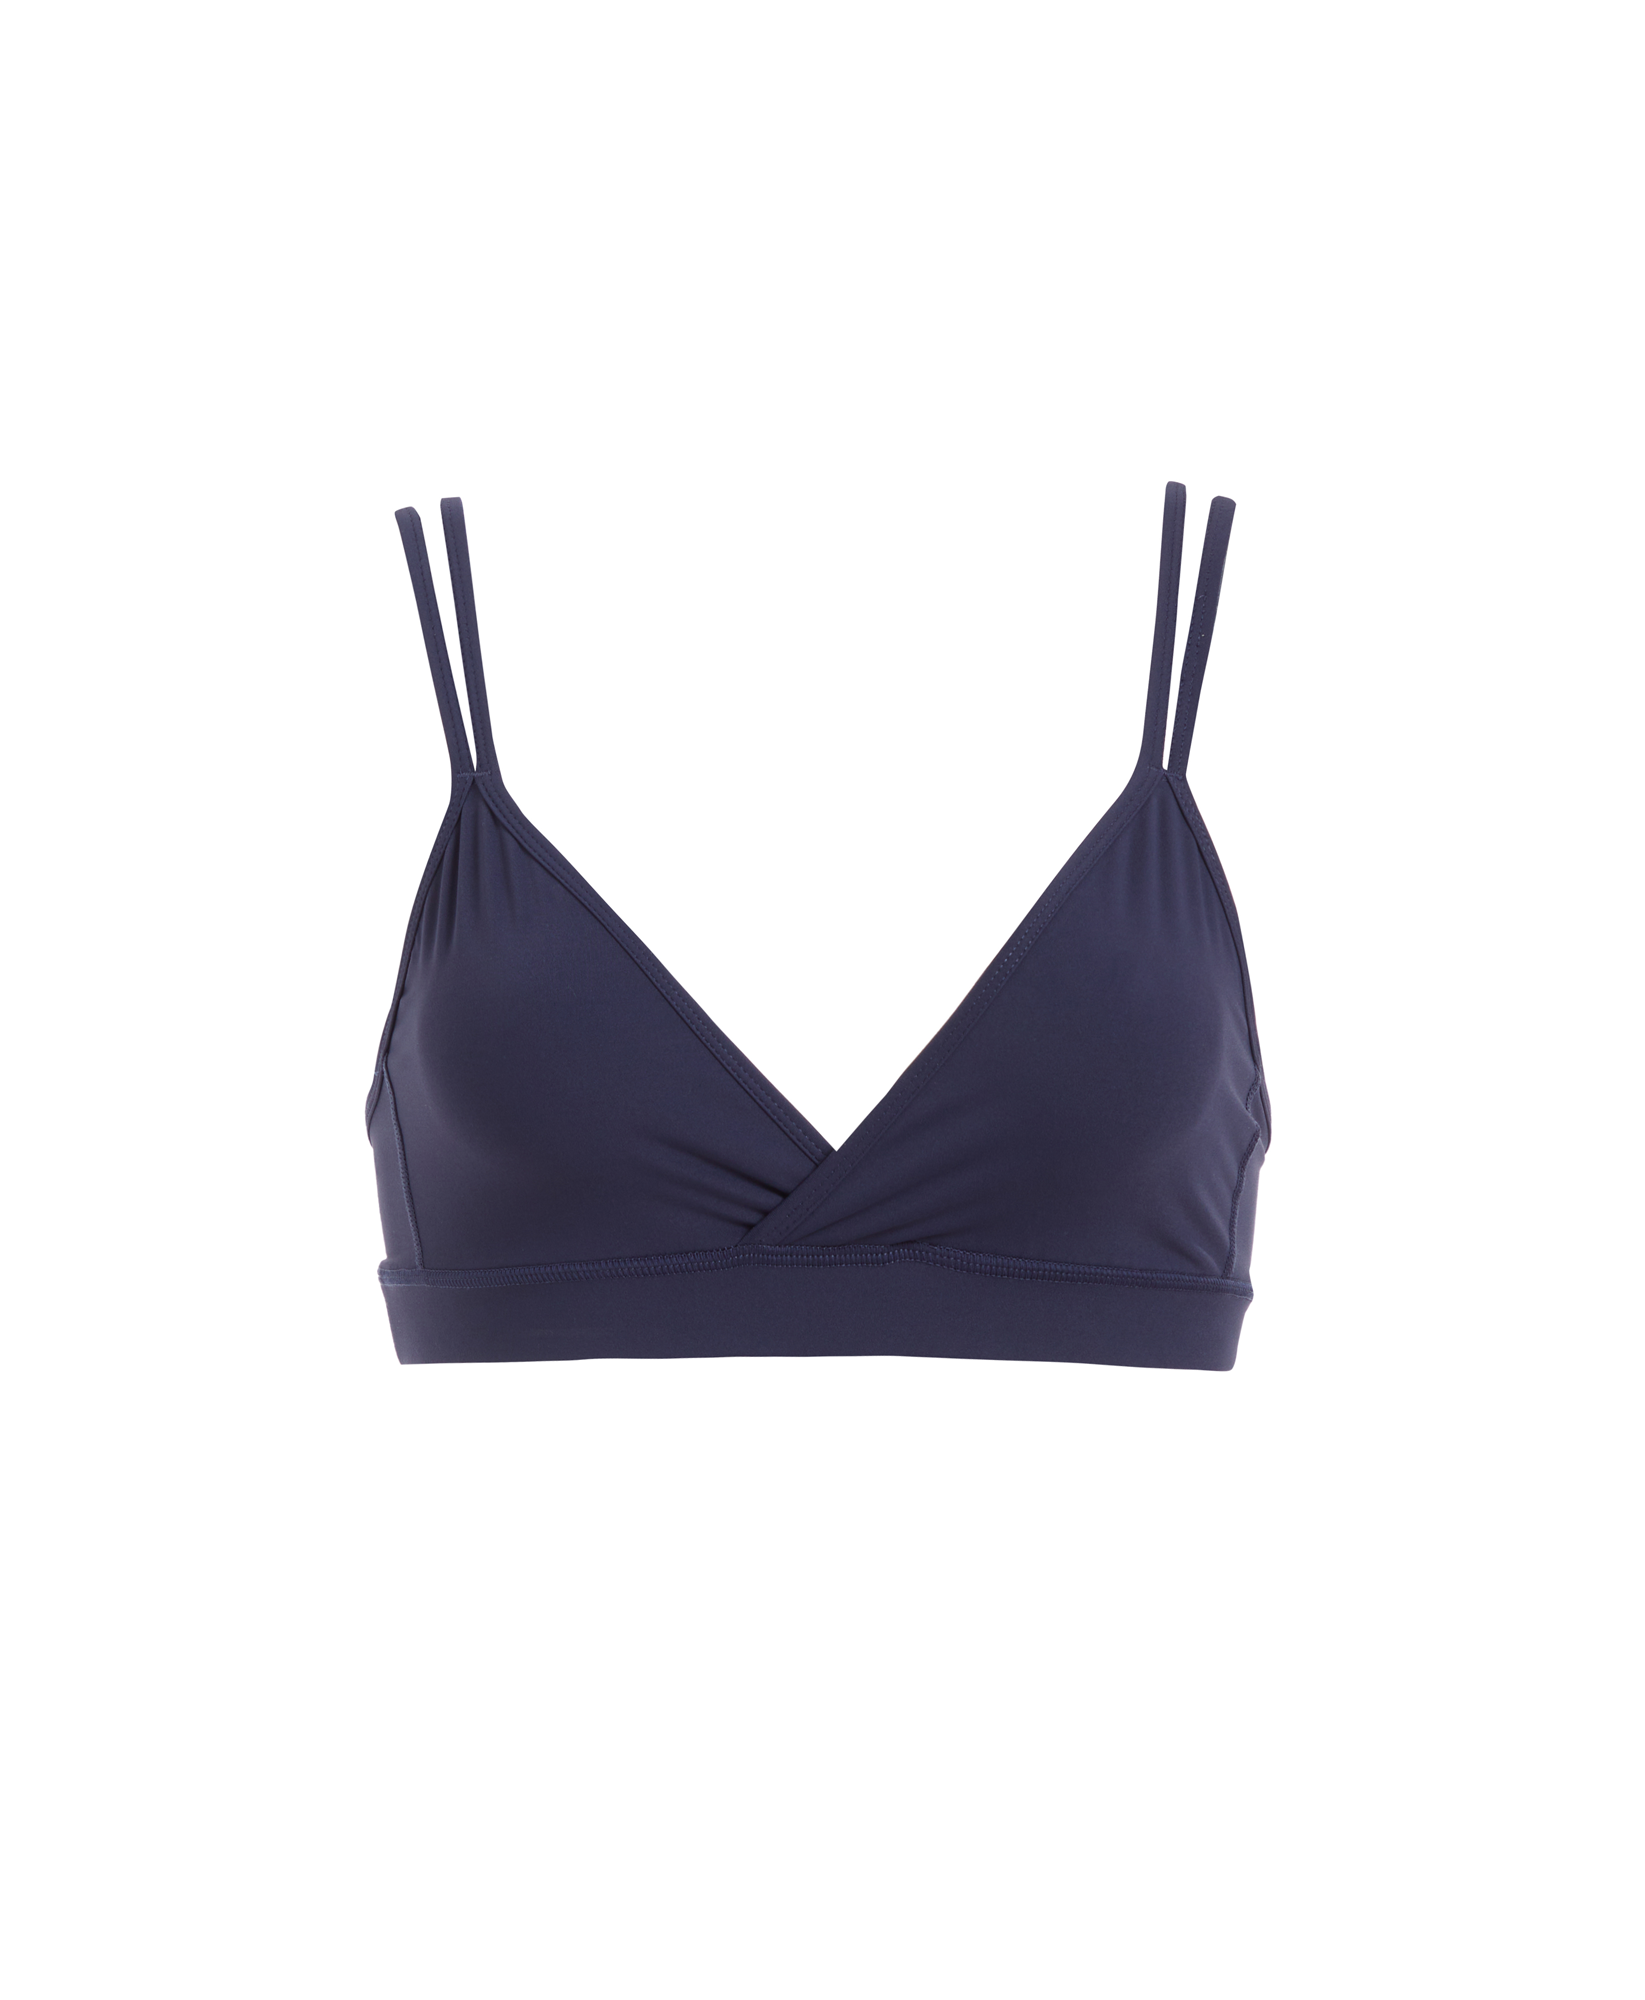 Wear One's At Groove Bra in navy on model front view